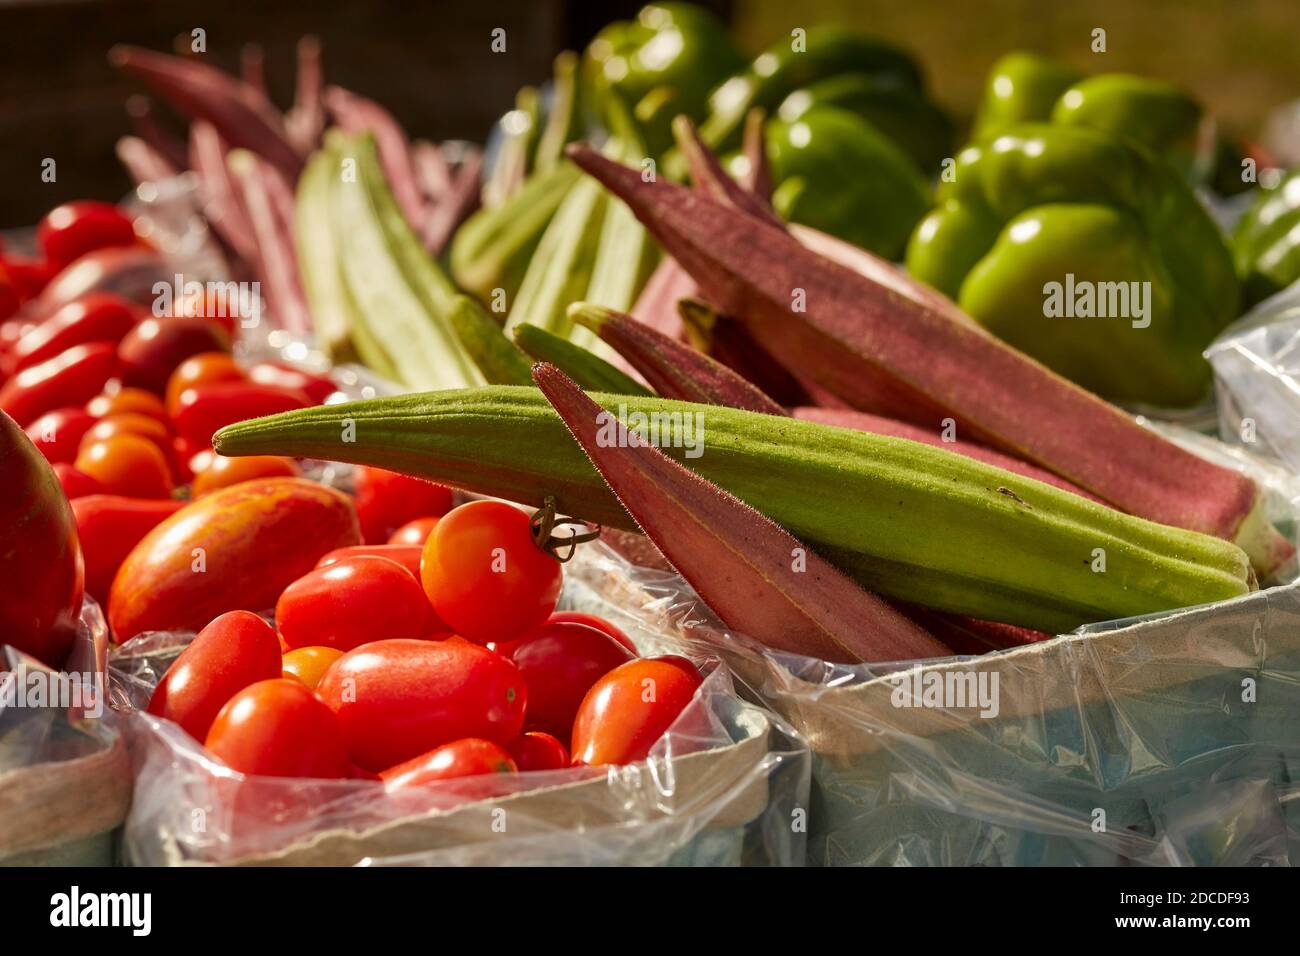 Fresh, ripe, summer vegetables at a farmer's market in the Finger Lakes region of New York State. Stock Photo